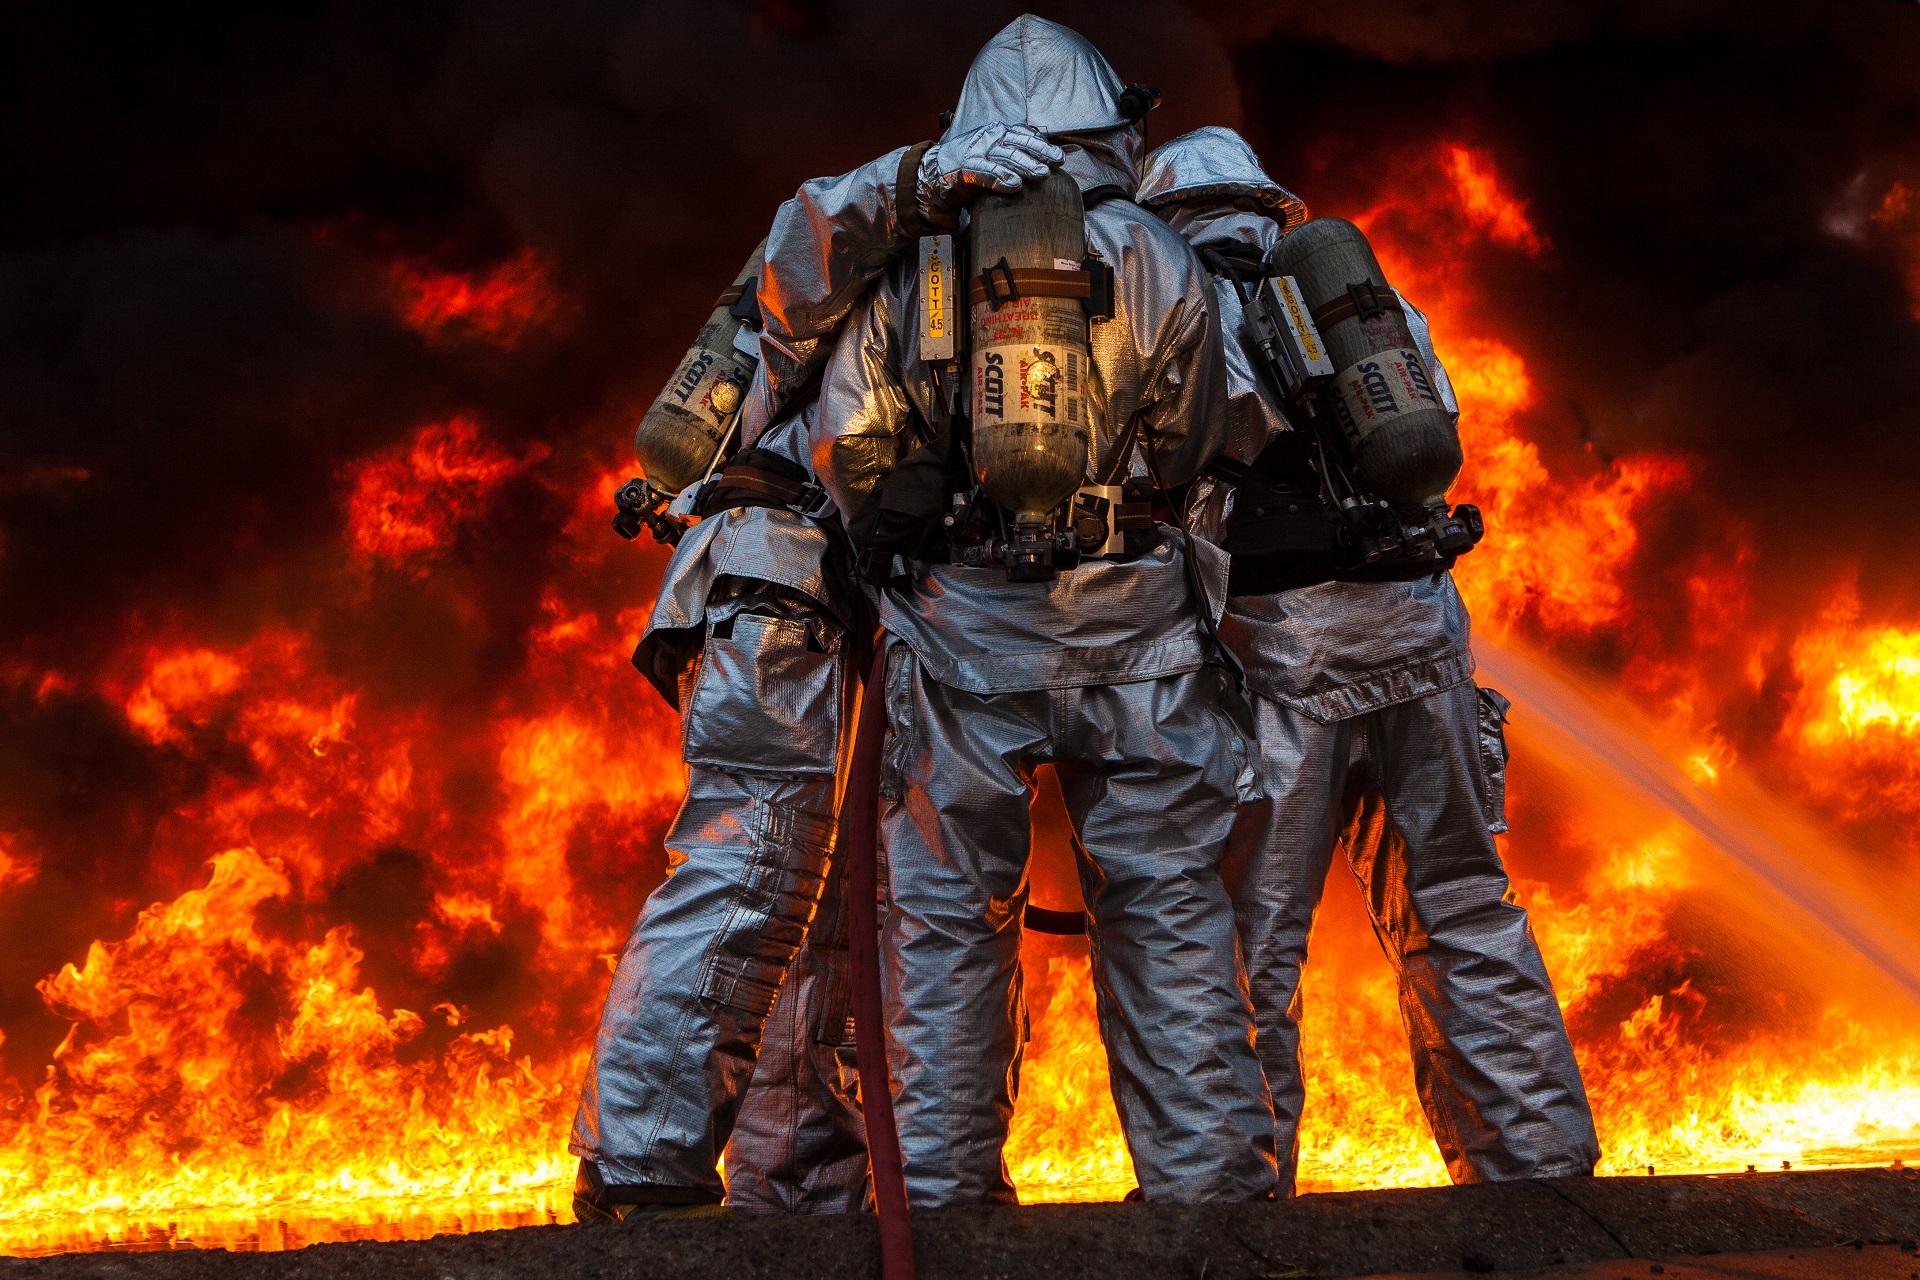 Fire fighters photo